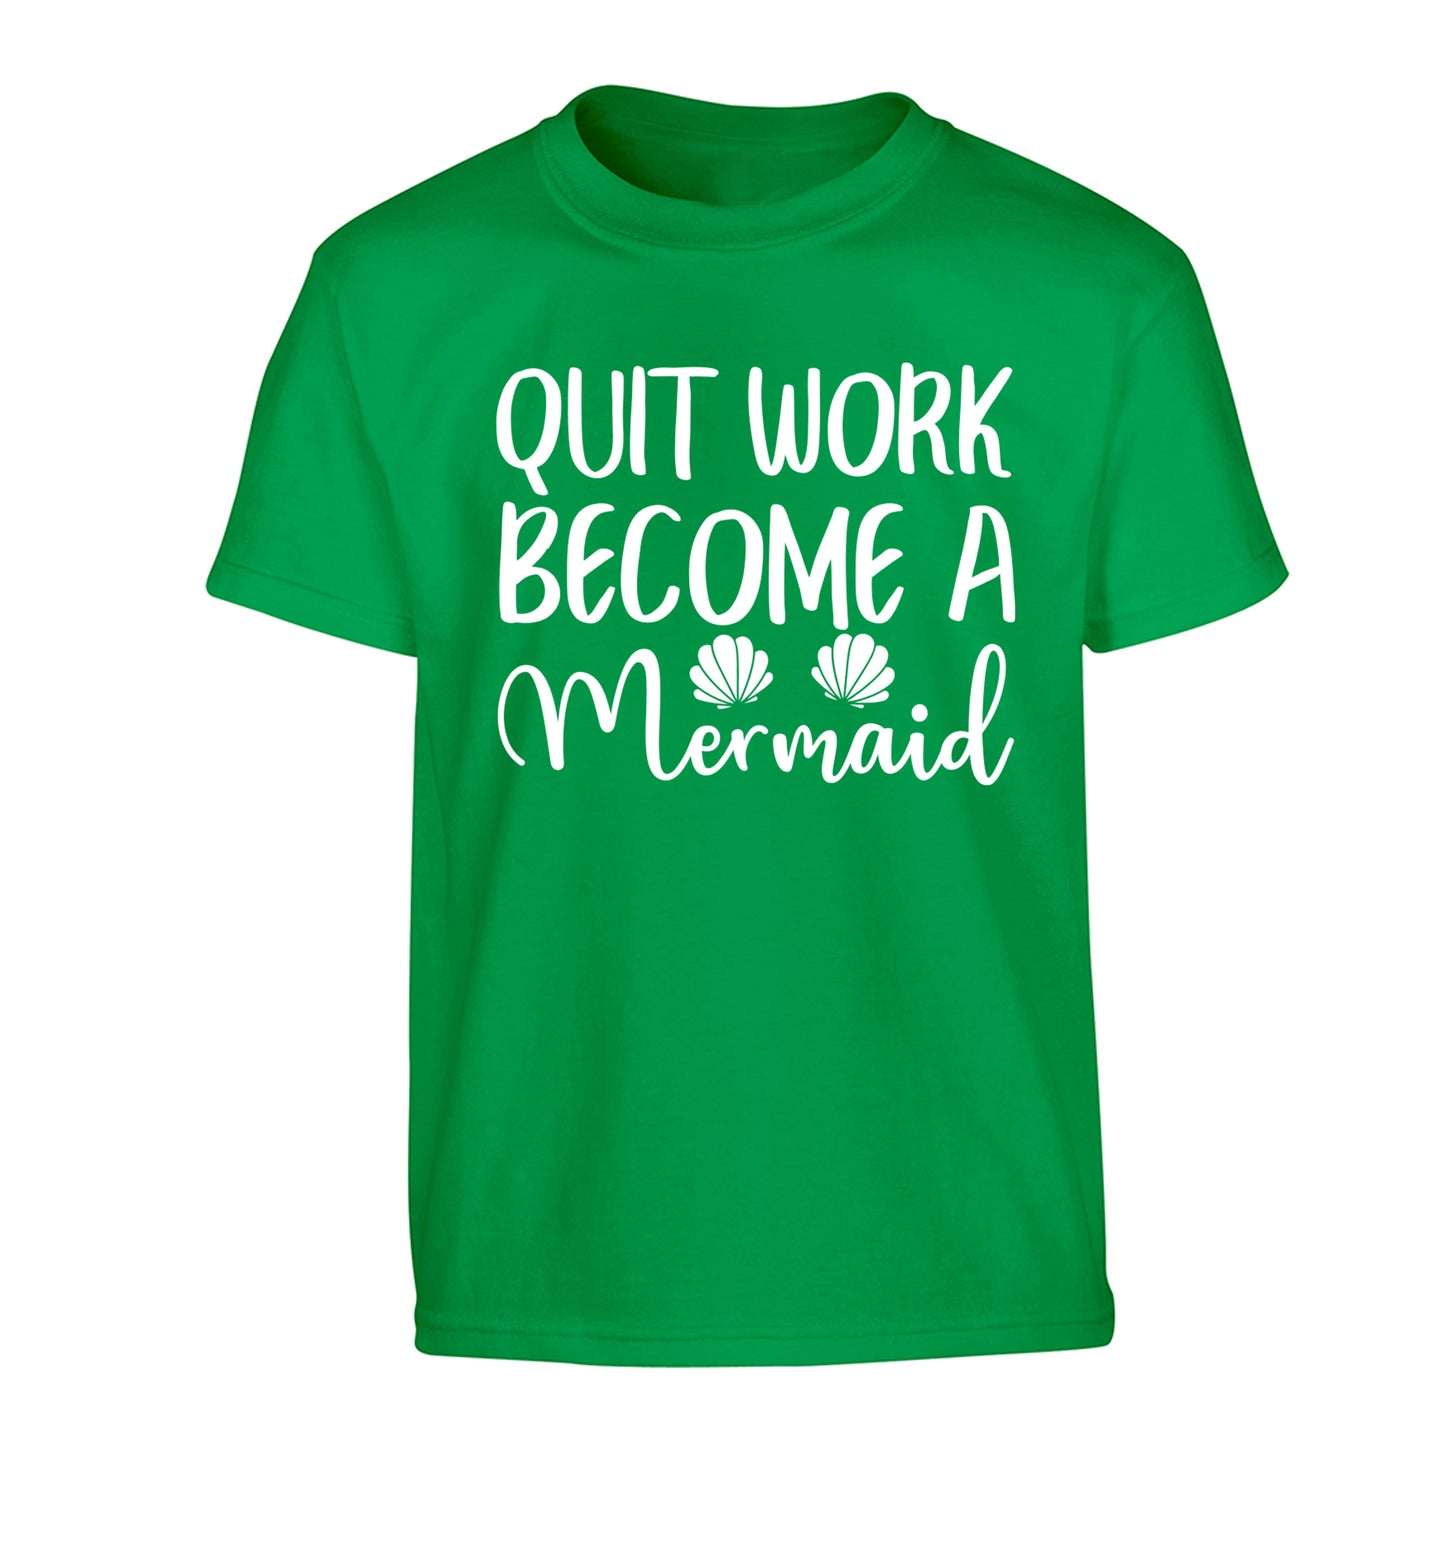 Quit work become a mermaid Children's green Tshirt 12-13 Years